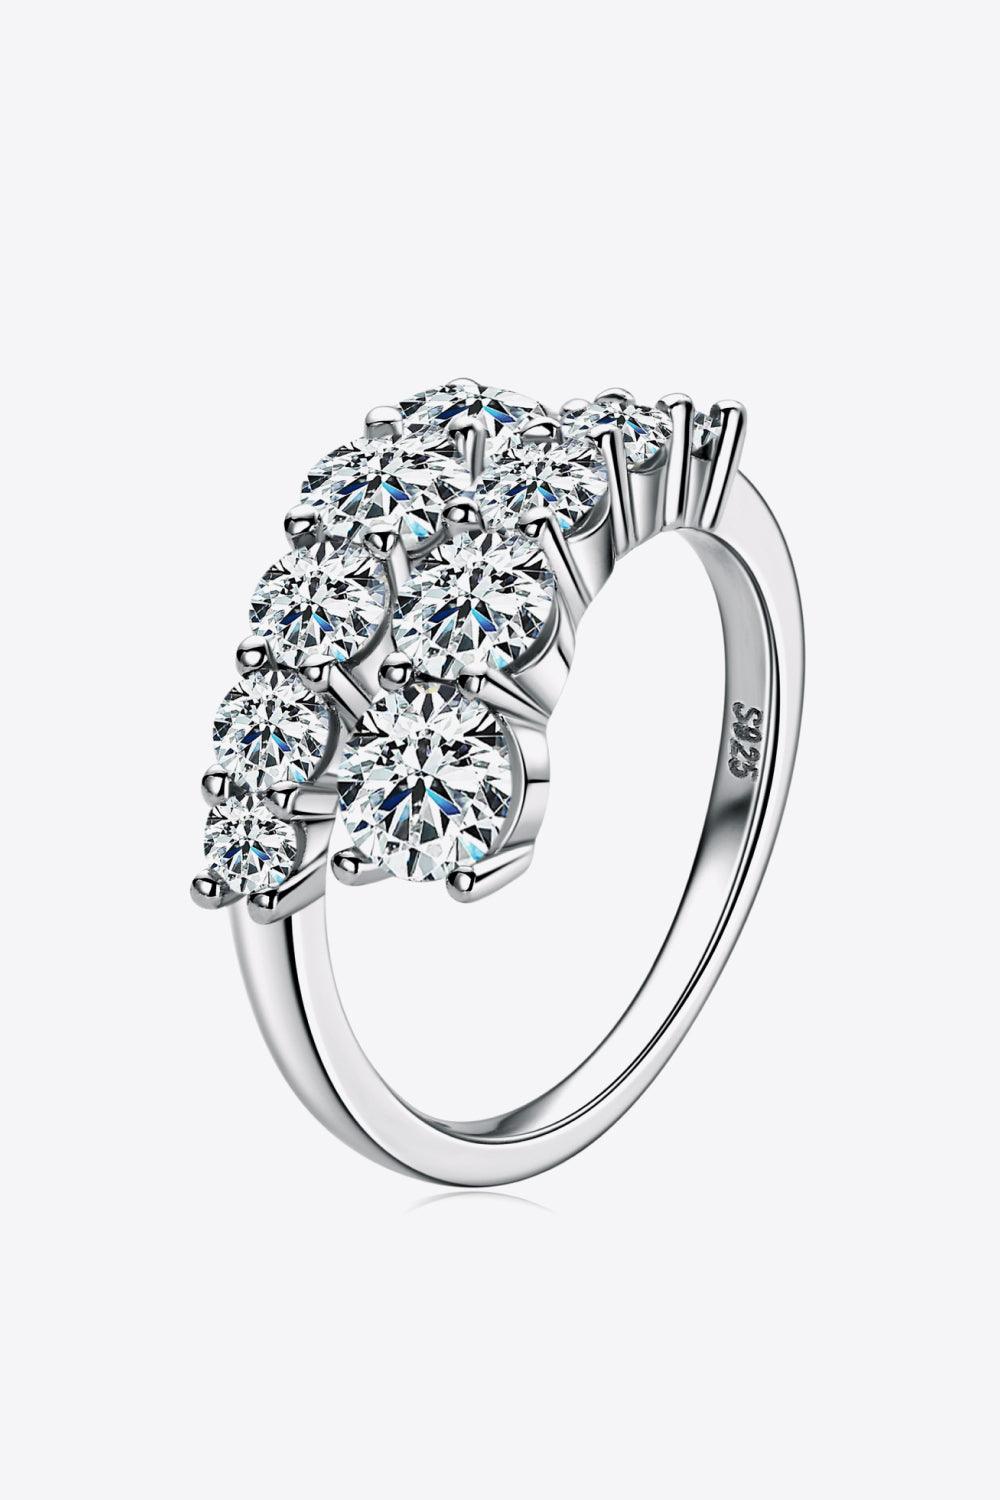 Adored Moissanite 925 Sterling Silver Ring - Lab Fashion, Home & Health